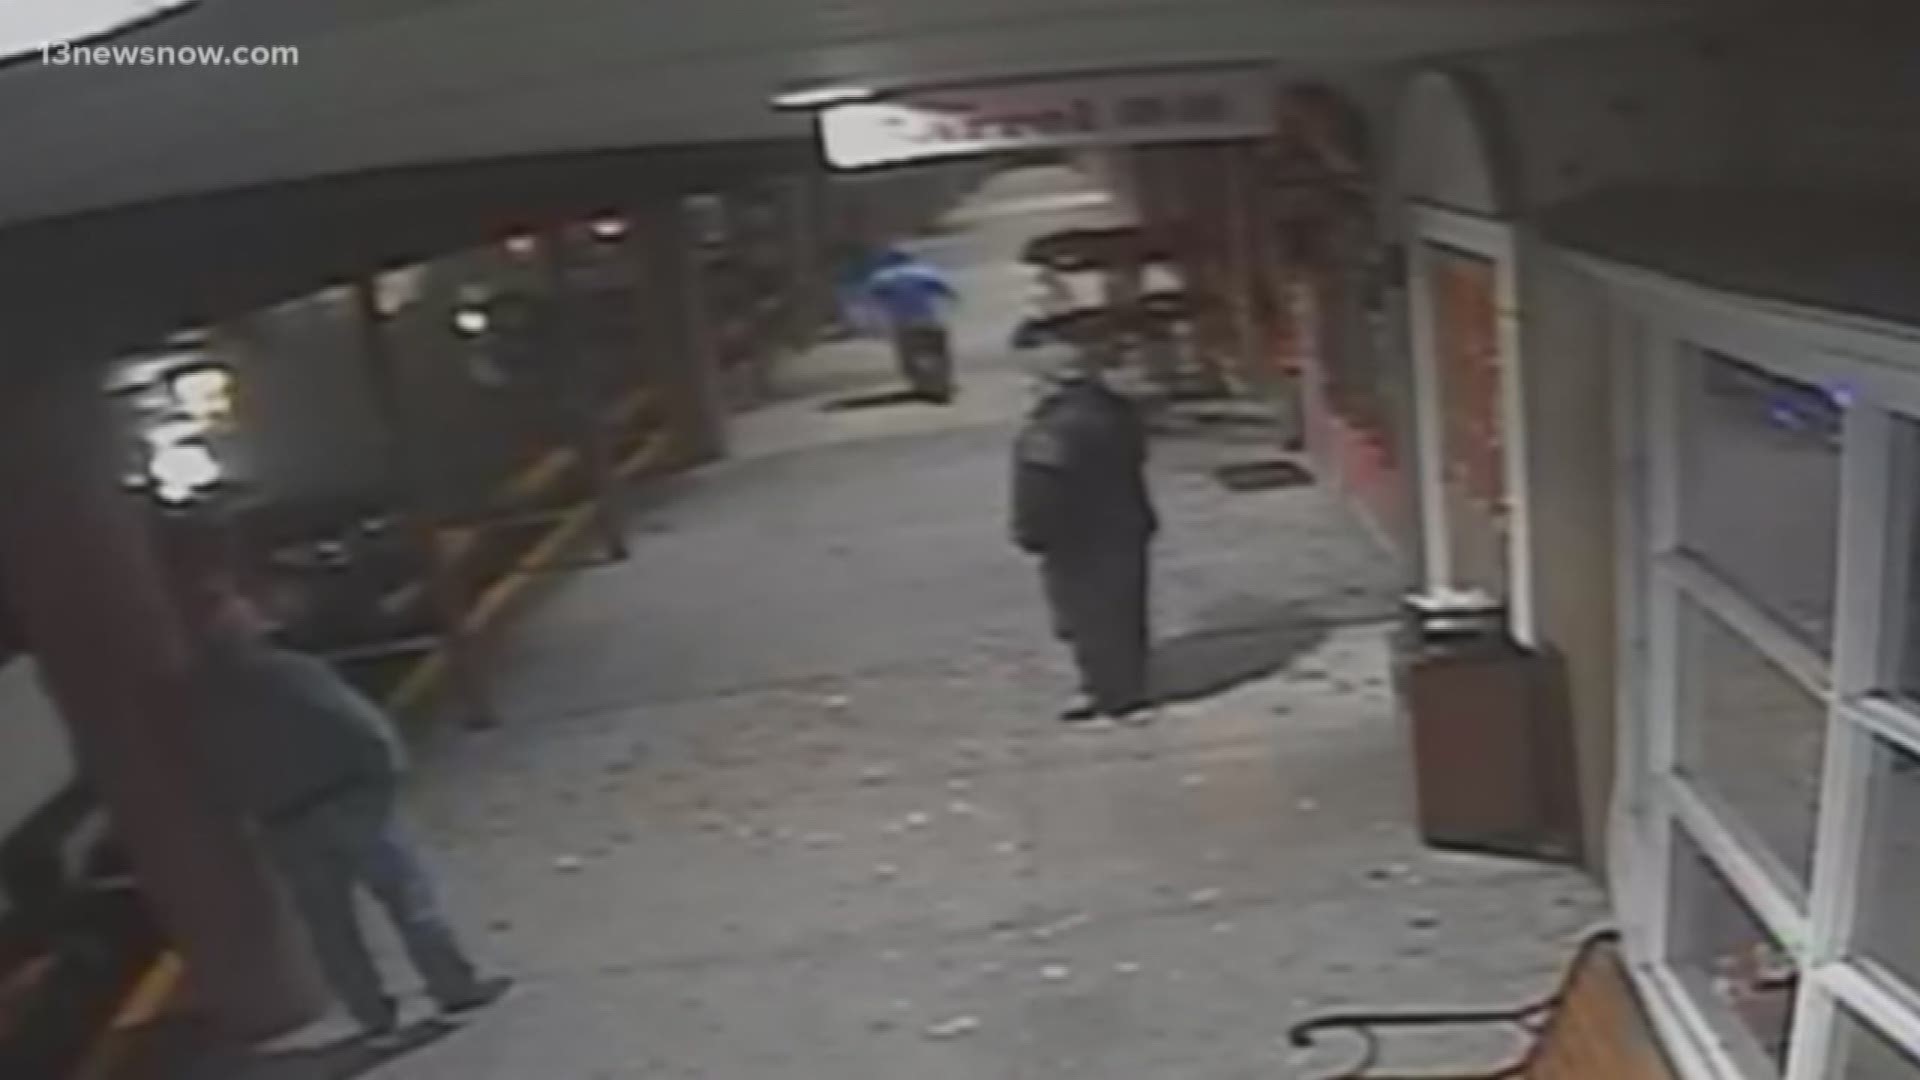 The bar originally claimed the attack didn't happen. New surveillance video shows a man being beaten outside the bar.